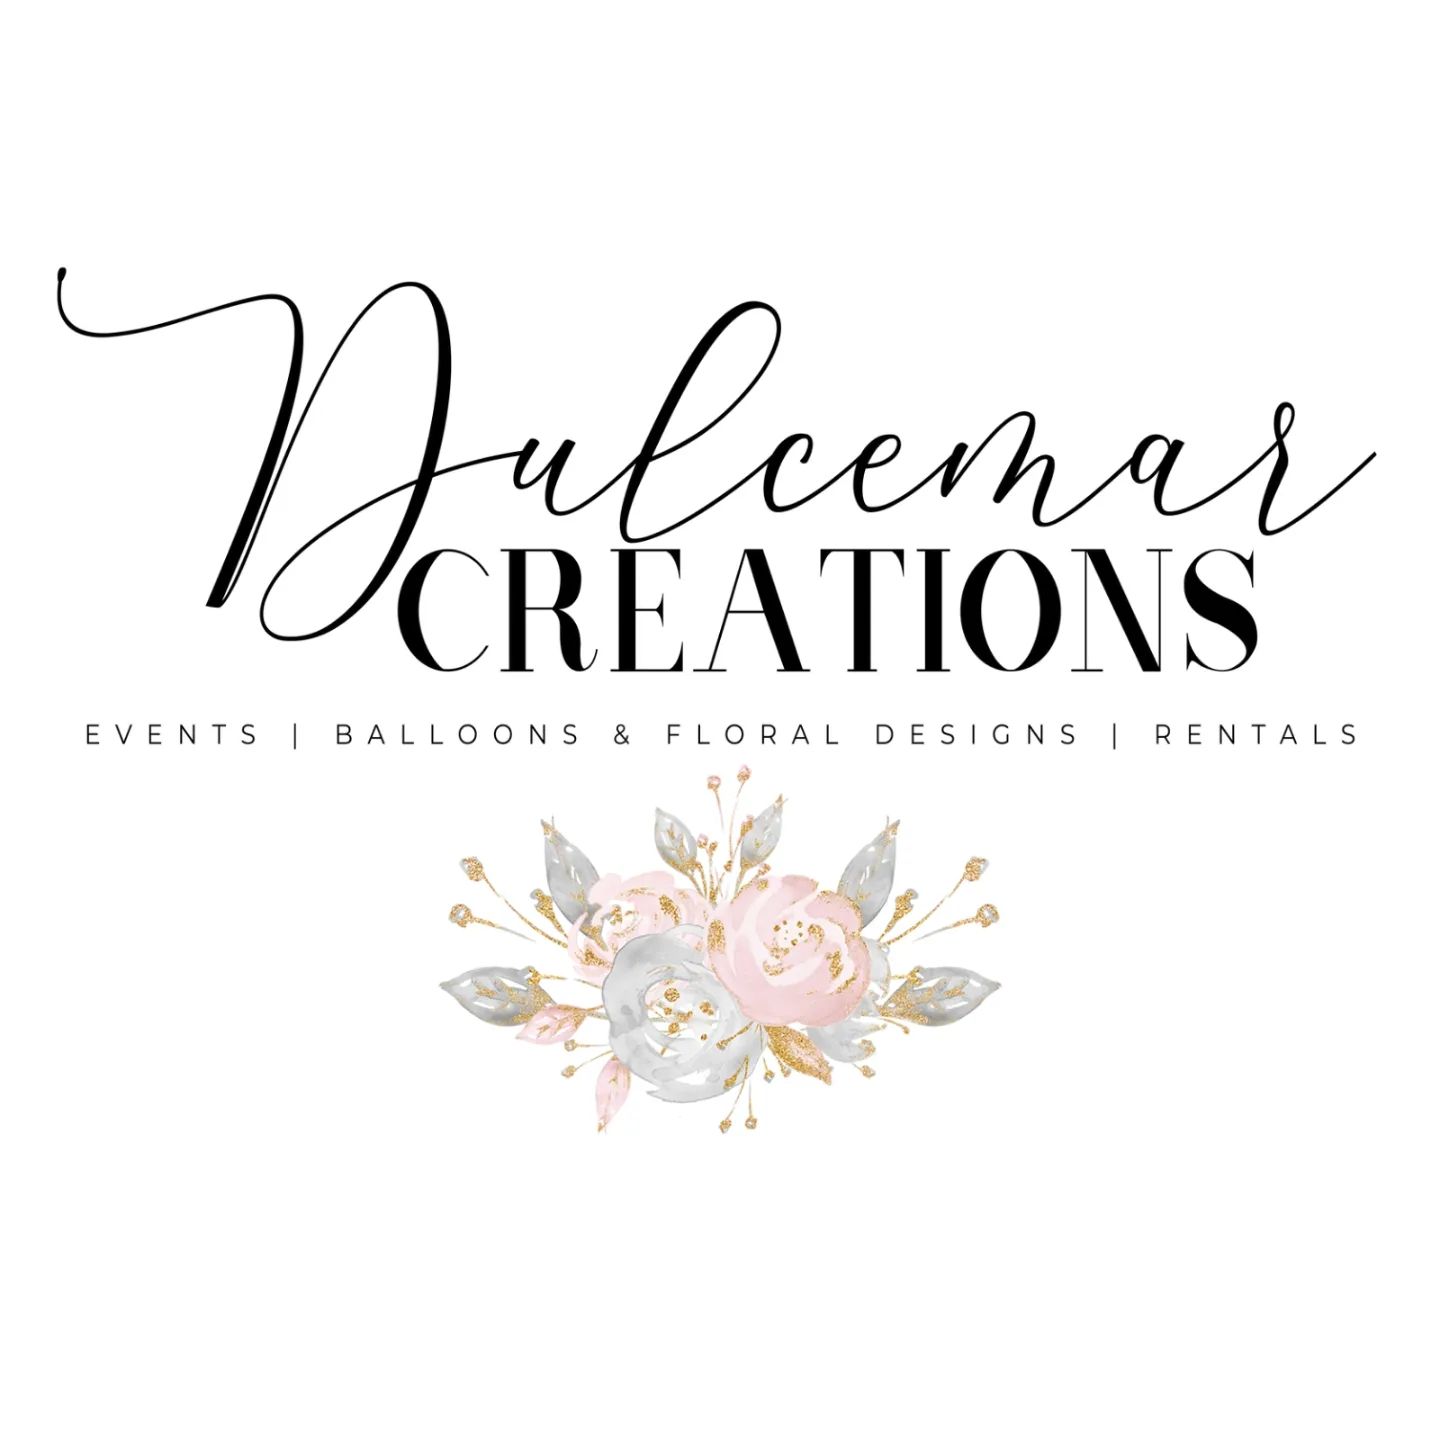 dulcemarcreations VENDER